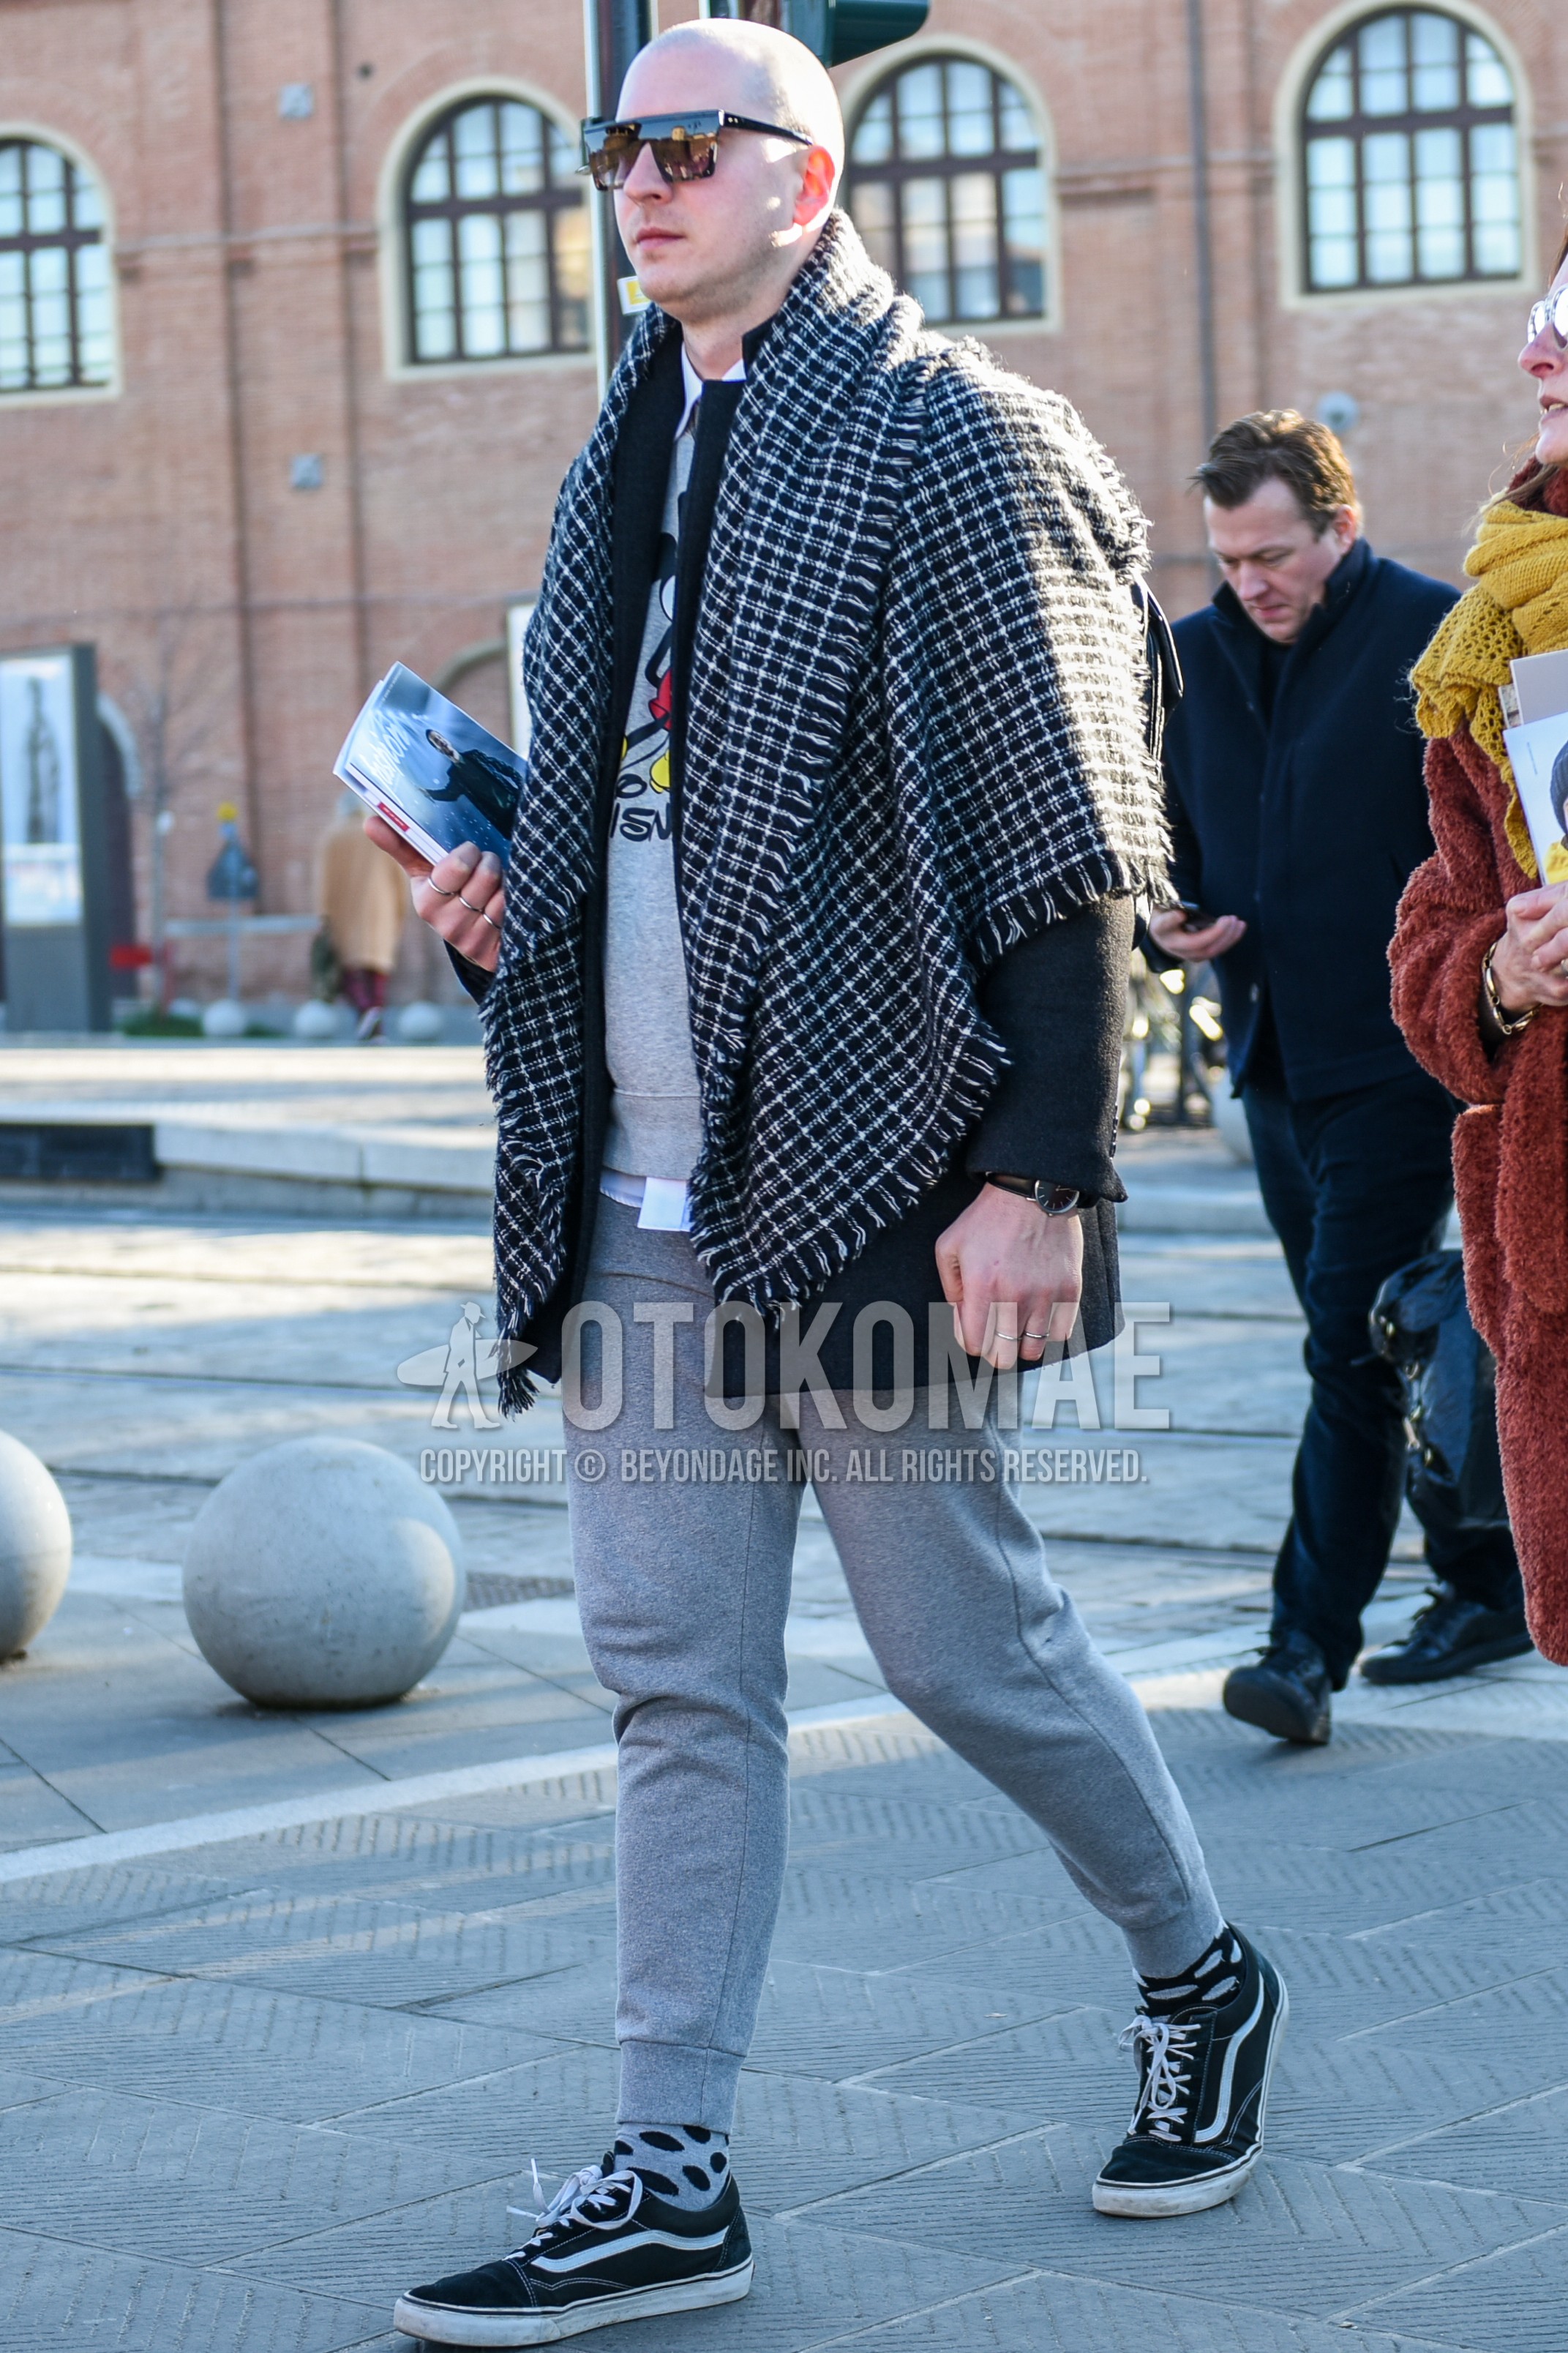 Men's autumn winter outfit with black plain sunglasses, black white check scarf, gray graphic sweatshirt, white plain shirt, gray plain sweatpants, gray dots socks, black low-cut sneakers.